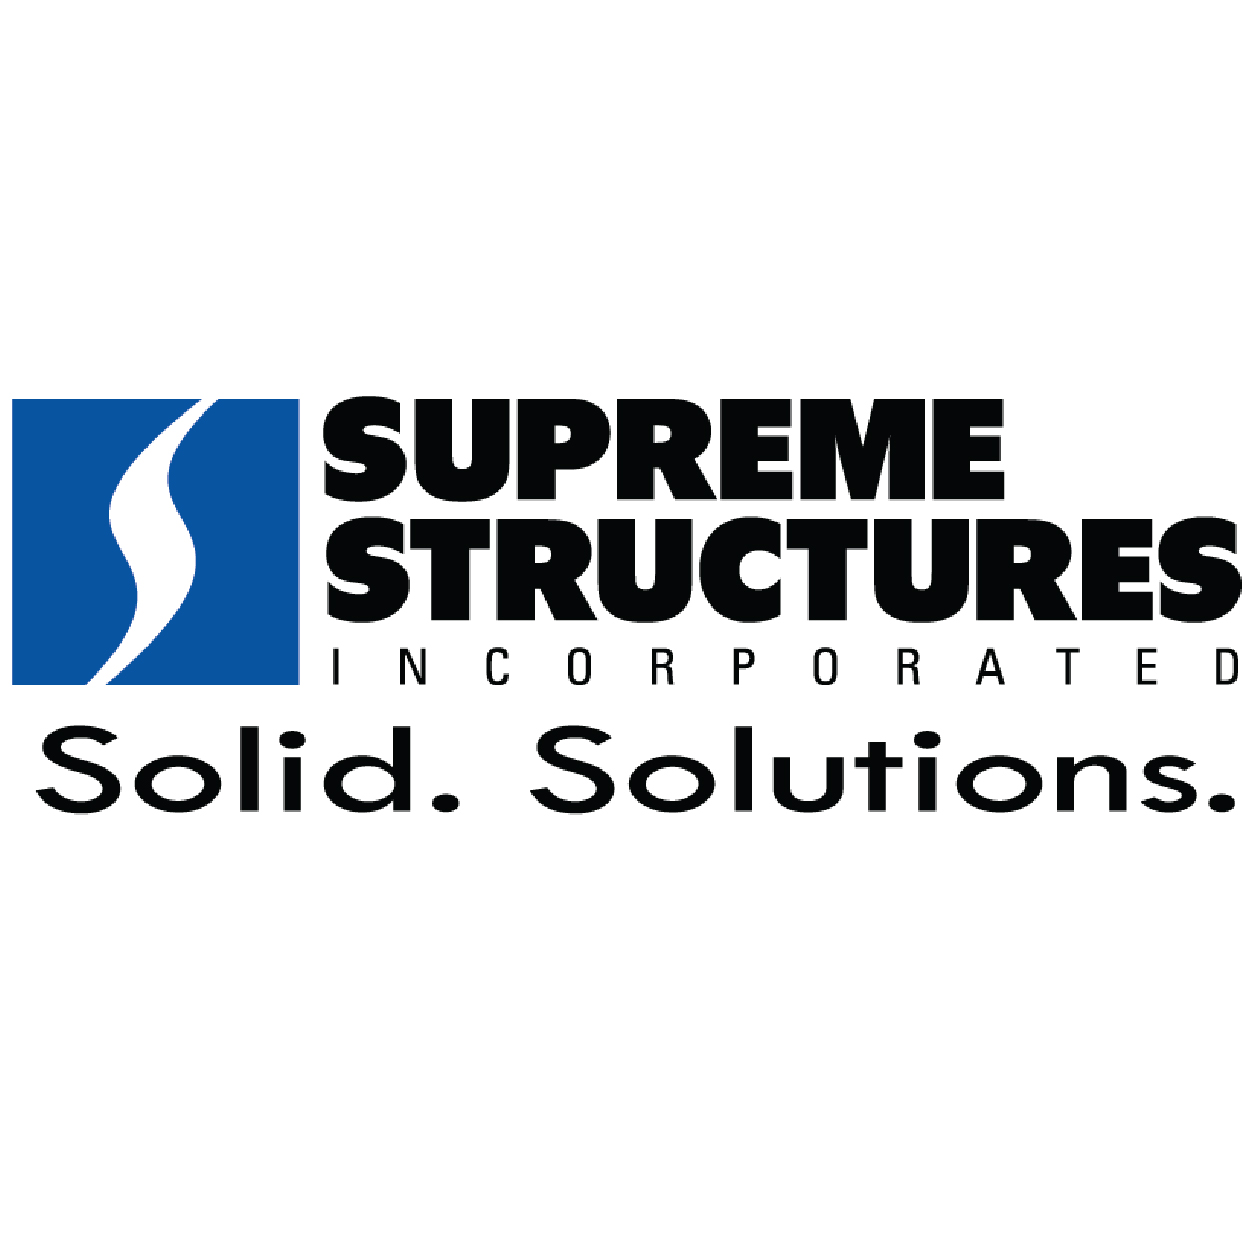 Supreme Structures